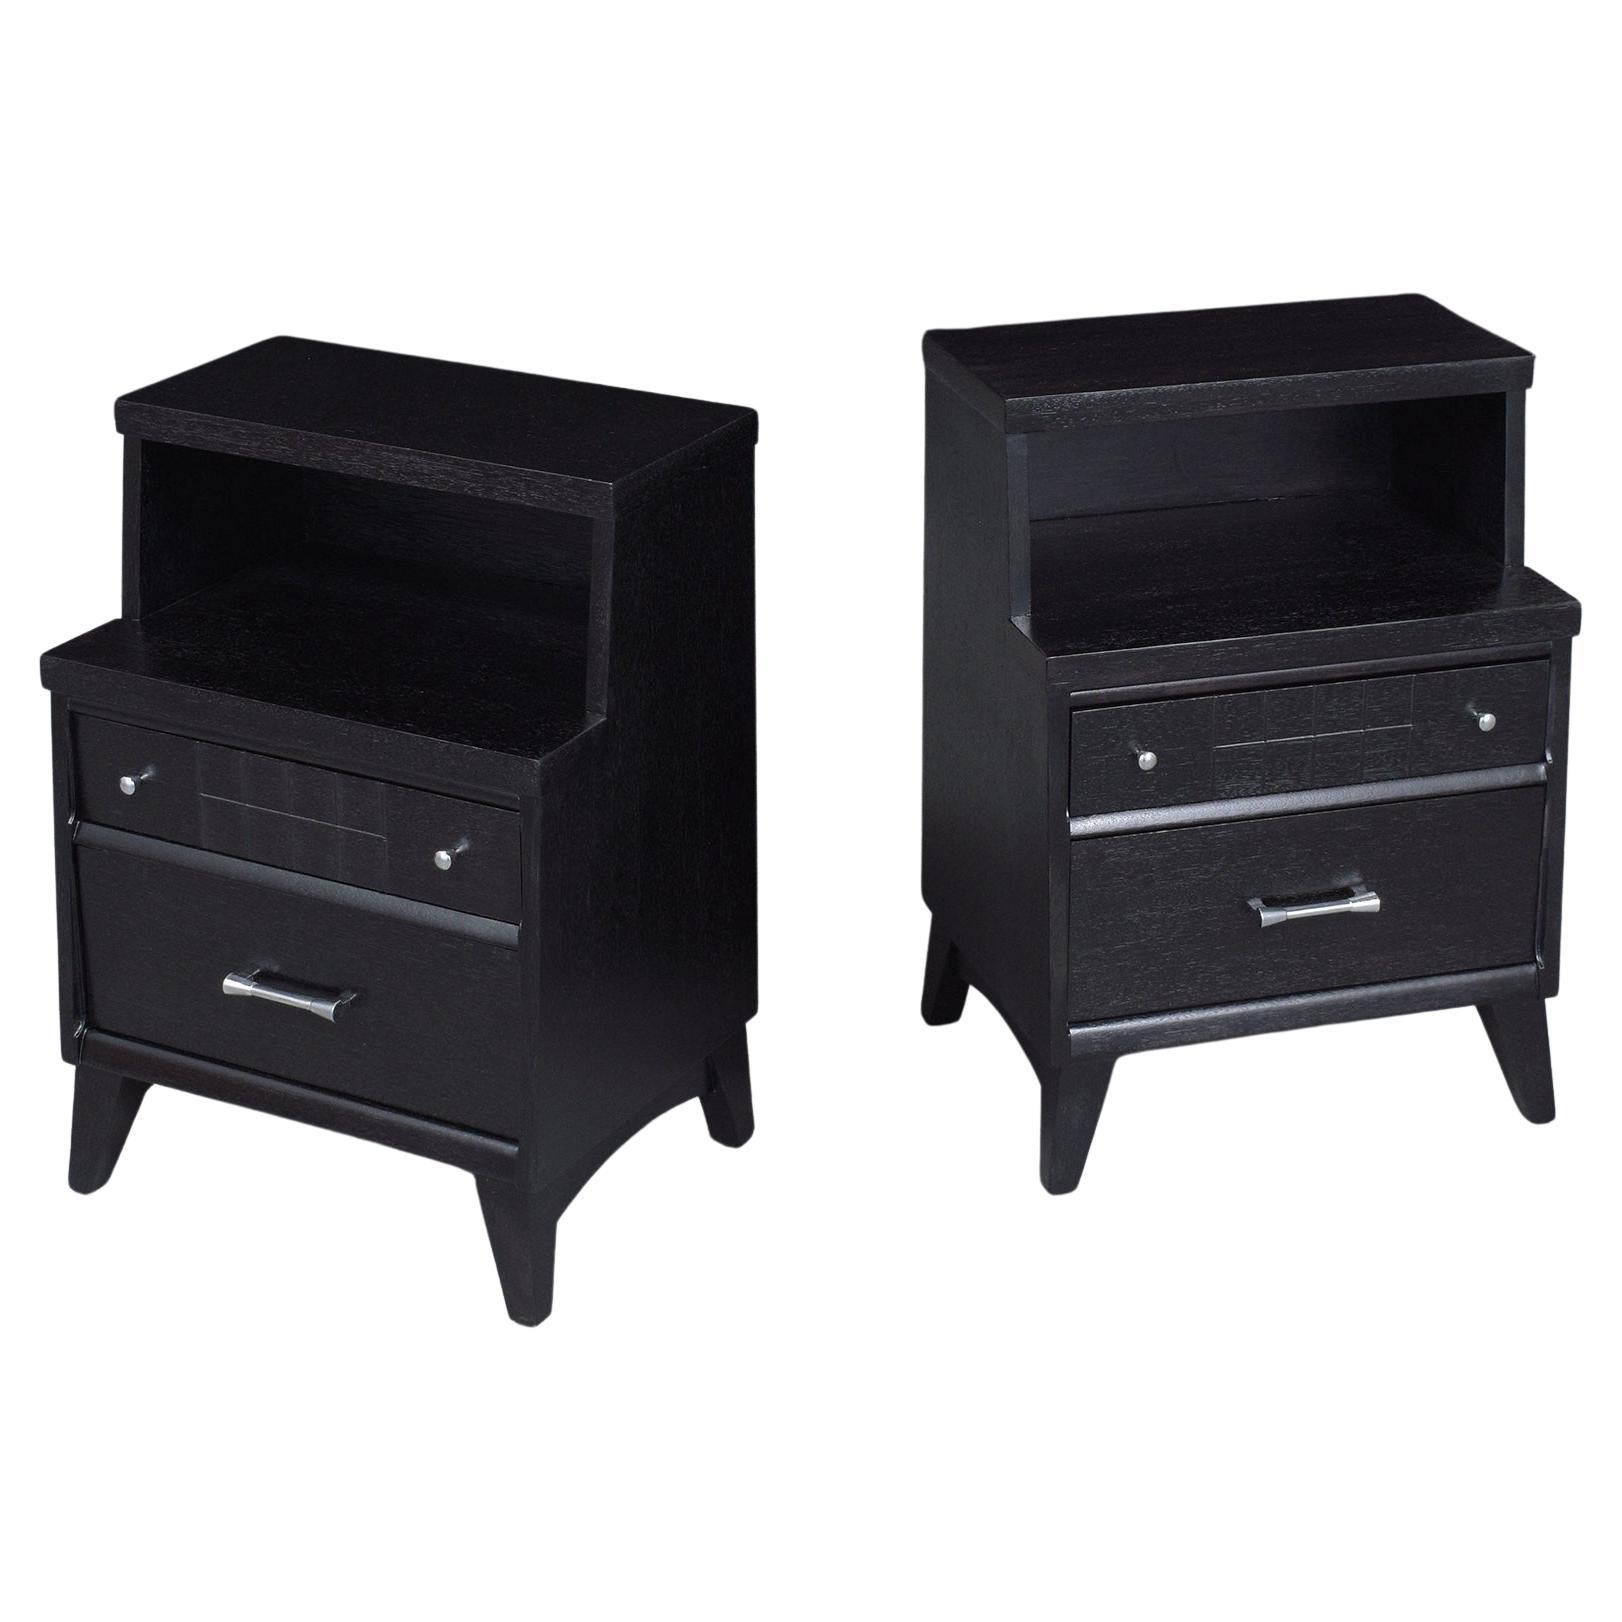 Vintage Mid-Century Modern Nightstands with Ebonized Finish and Chrome Hardware